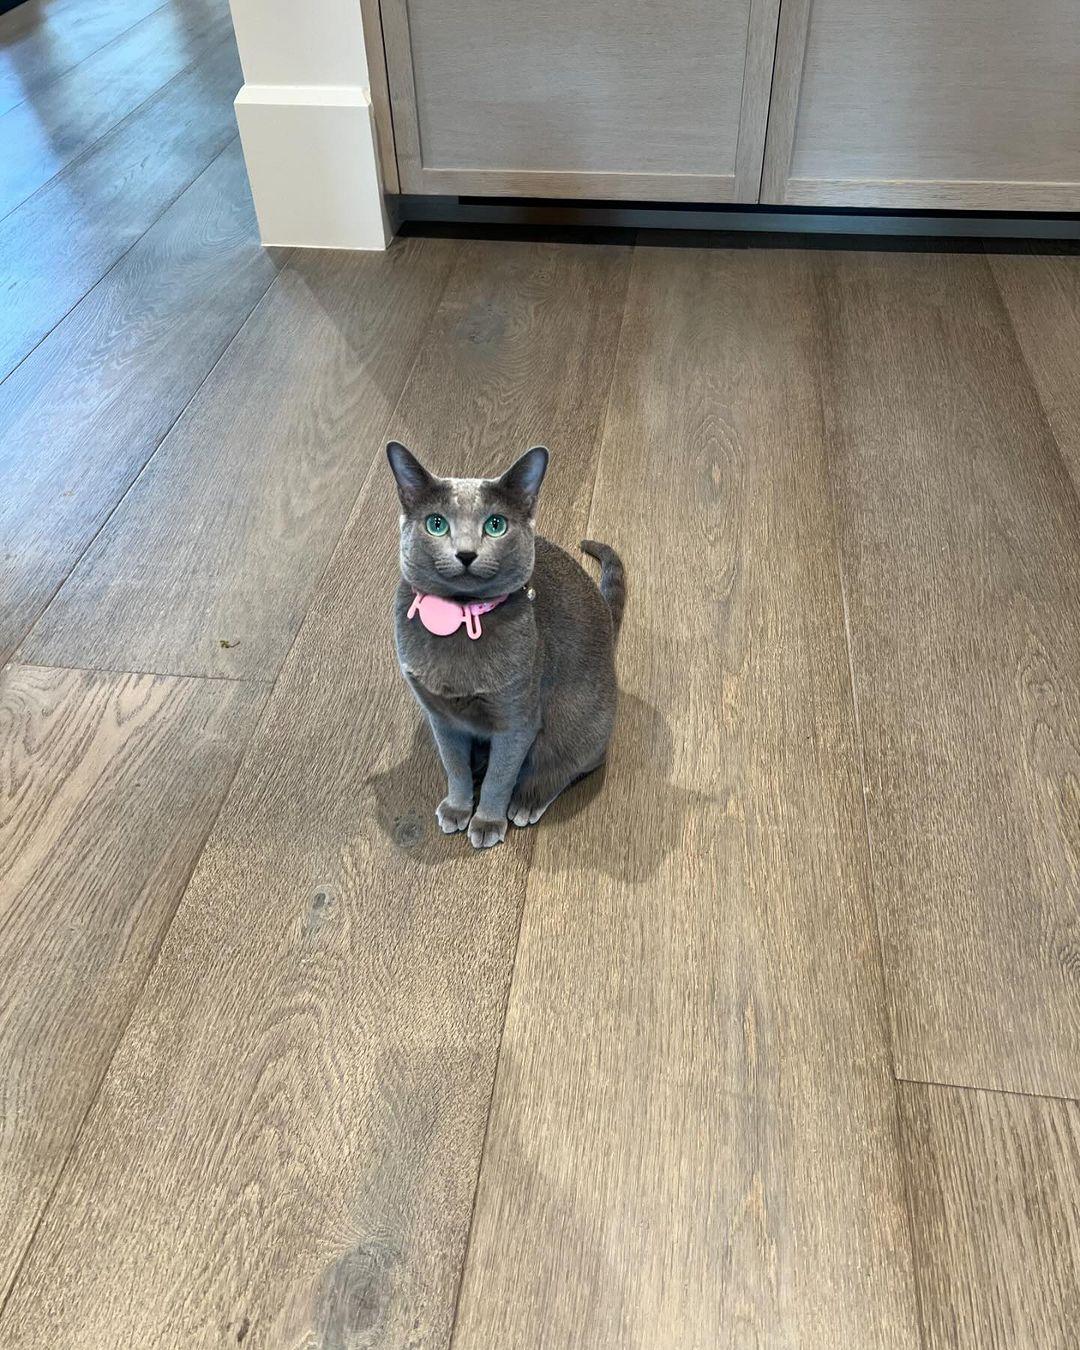 Khloe Kardashian Accused Of Using Facetune On Her Cat: 'Even The Cat Got Work Done'